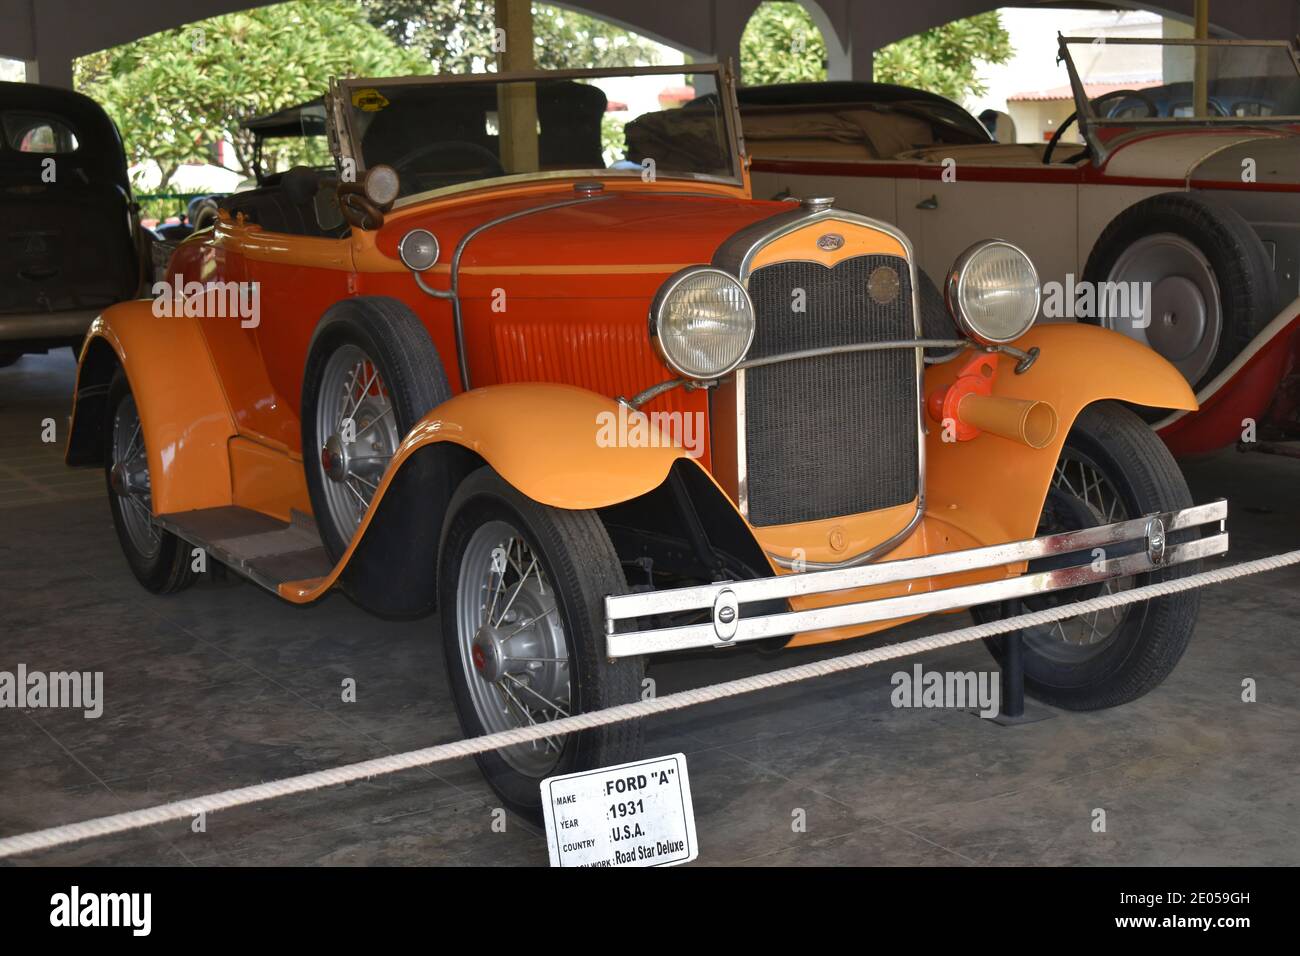 16 Nov 2020, Auto World Vintage Car Museum. Ahmedabad, Gujarat, India. FORD 'A' YEAR 1931, USA Road Star Deluxe Stock Photo